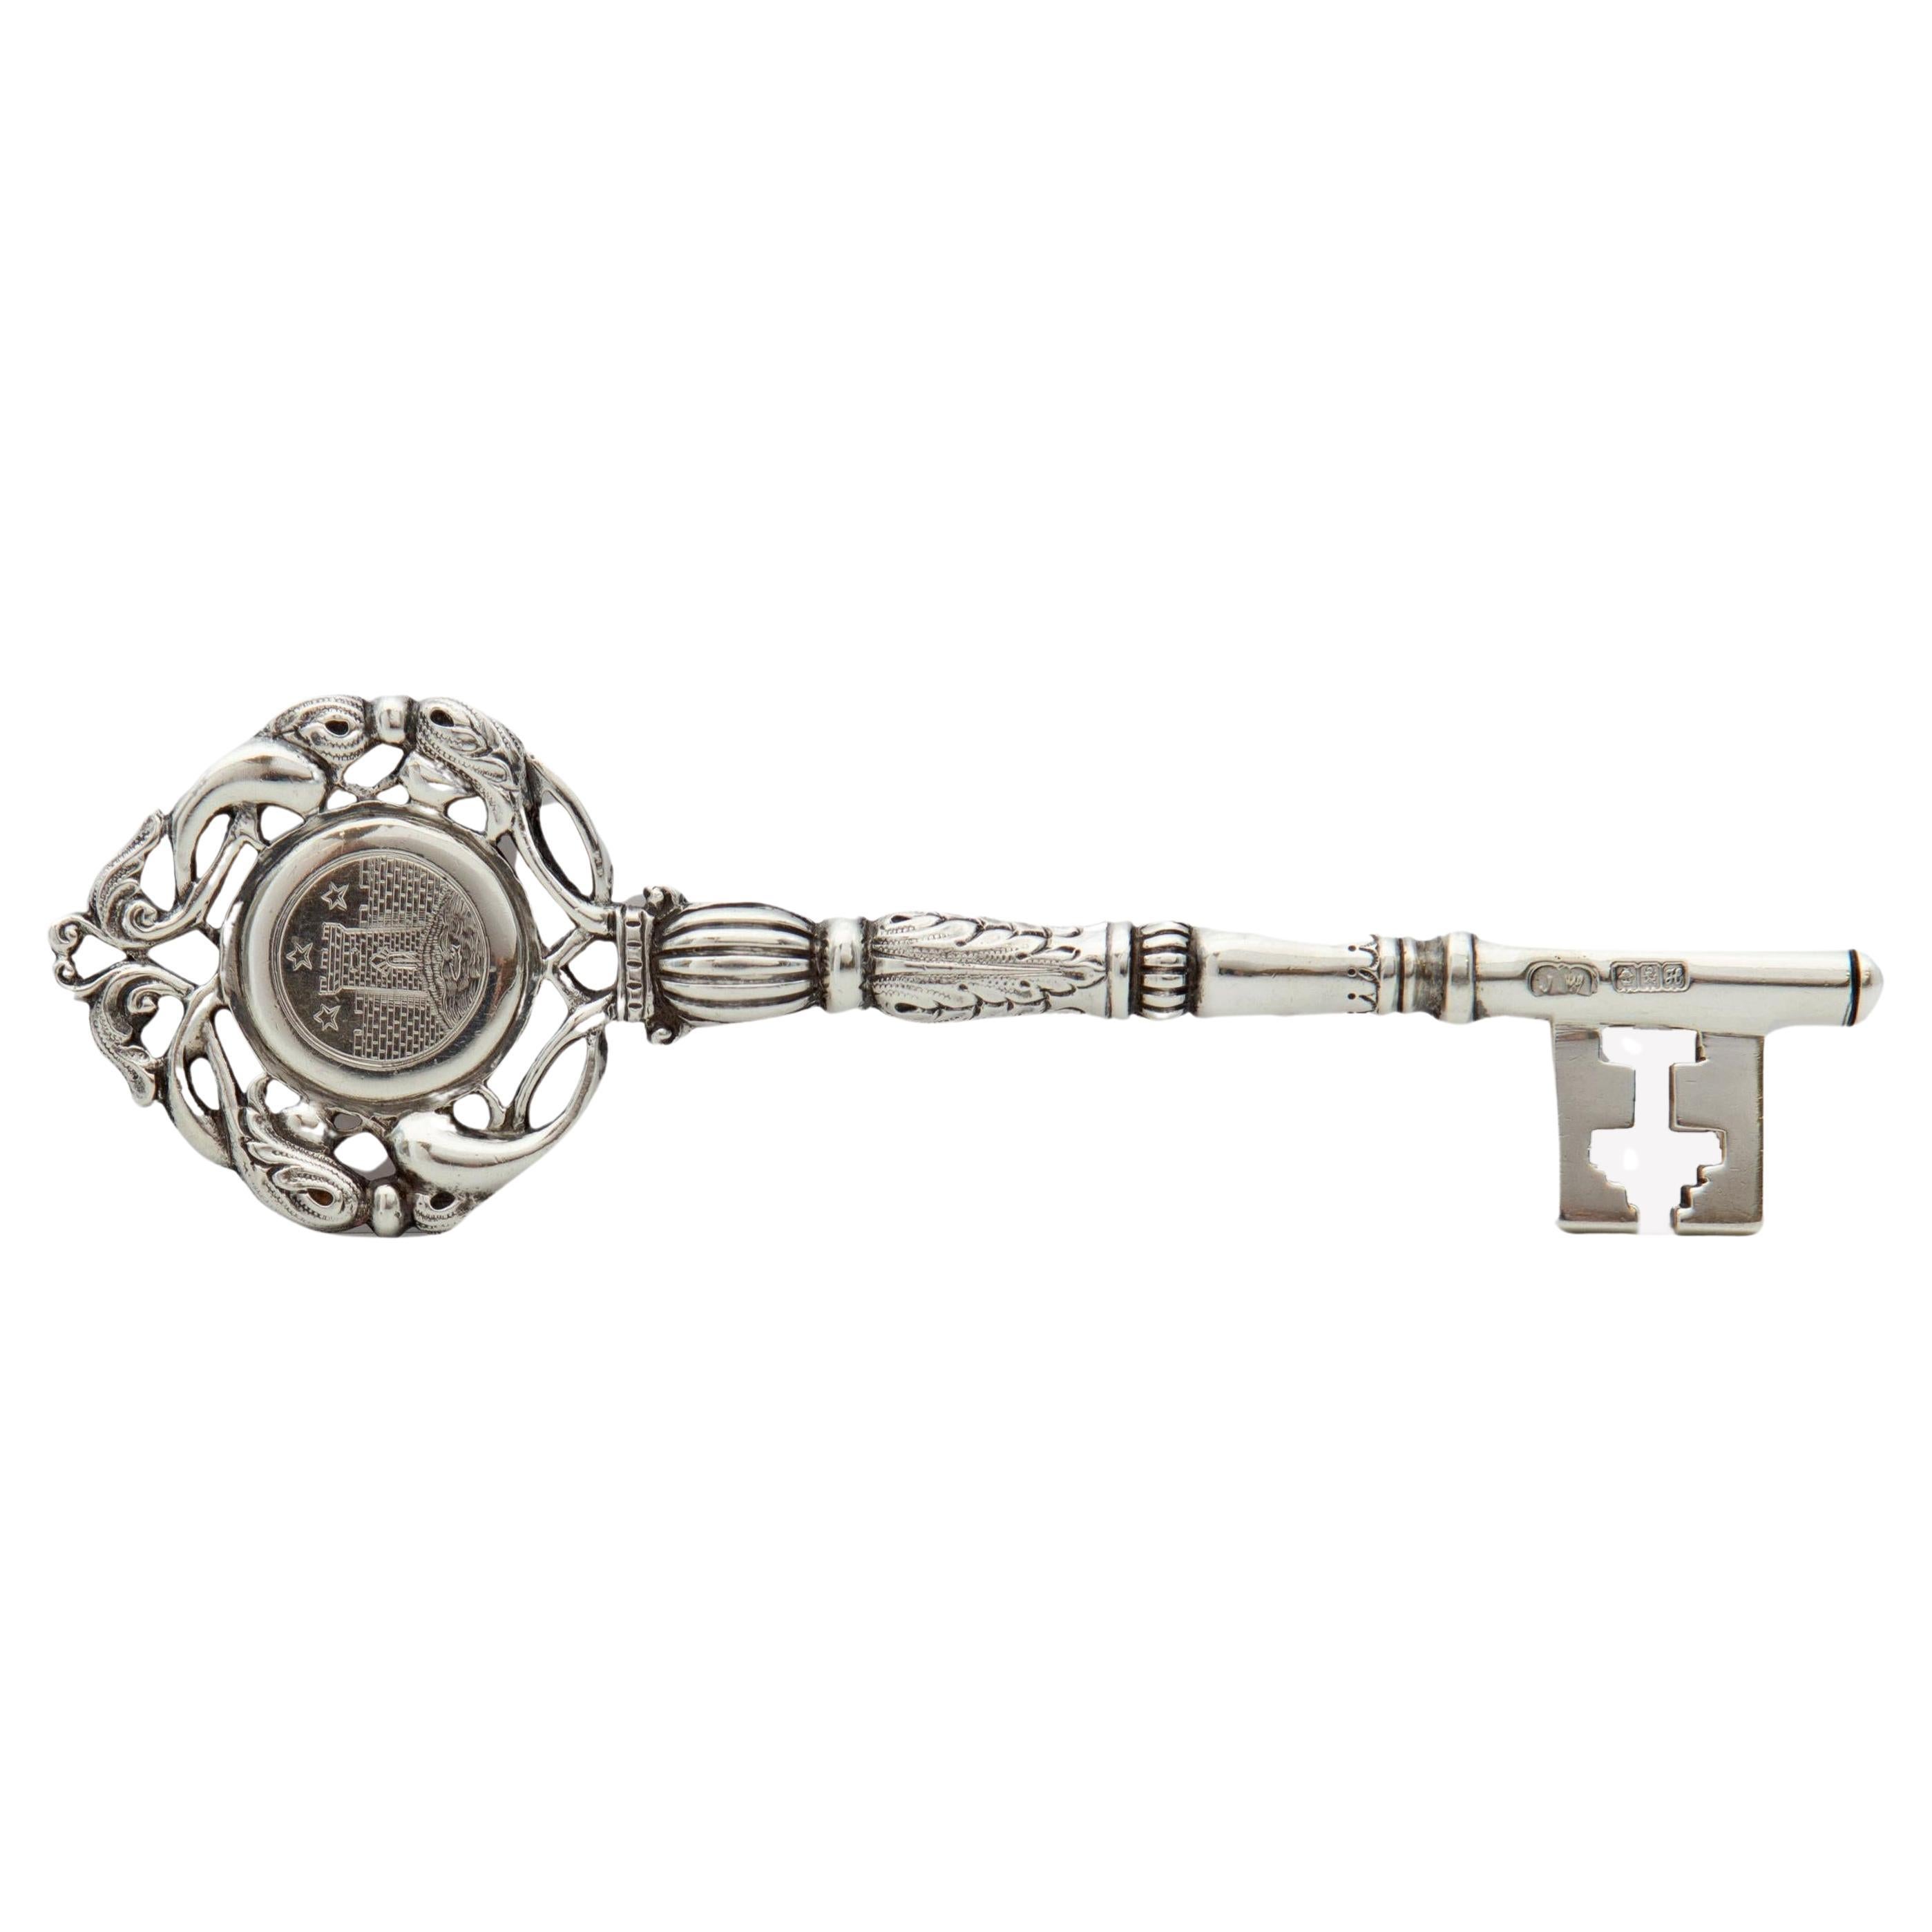 Edwardian Scottish Silver Presentation Key For The Perry Bandstand 1905 For Sale